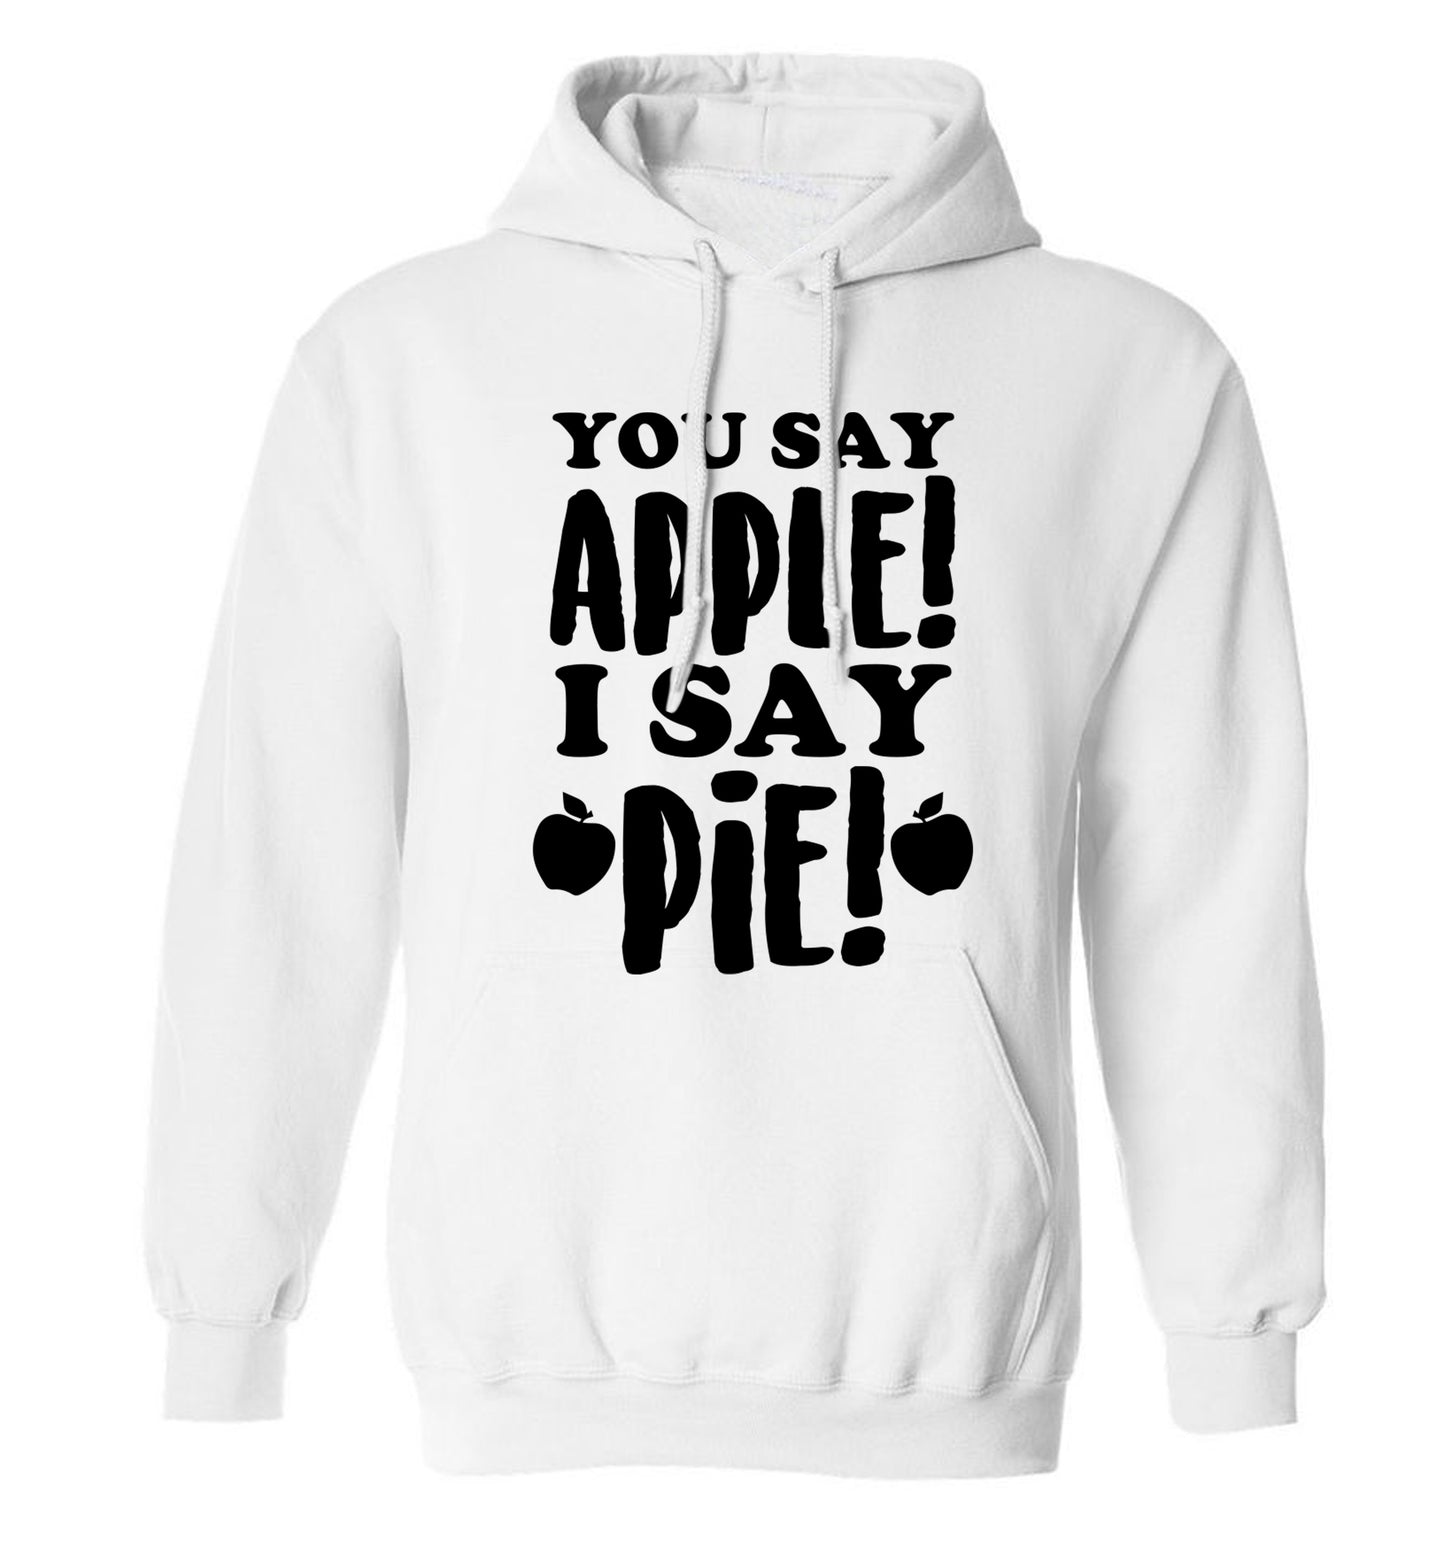 You say apple I say pie! adults unisex white hoodie 2XL